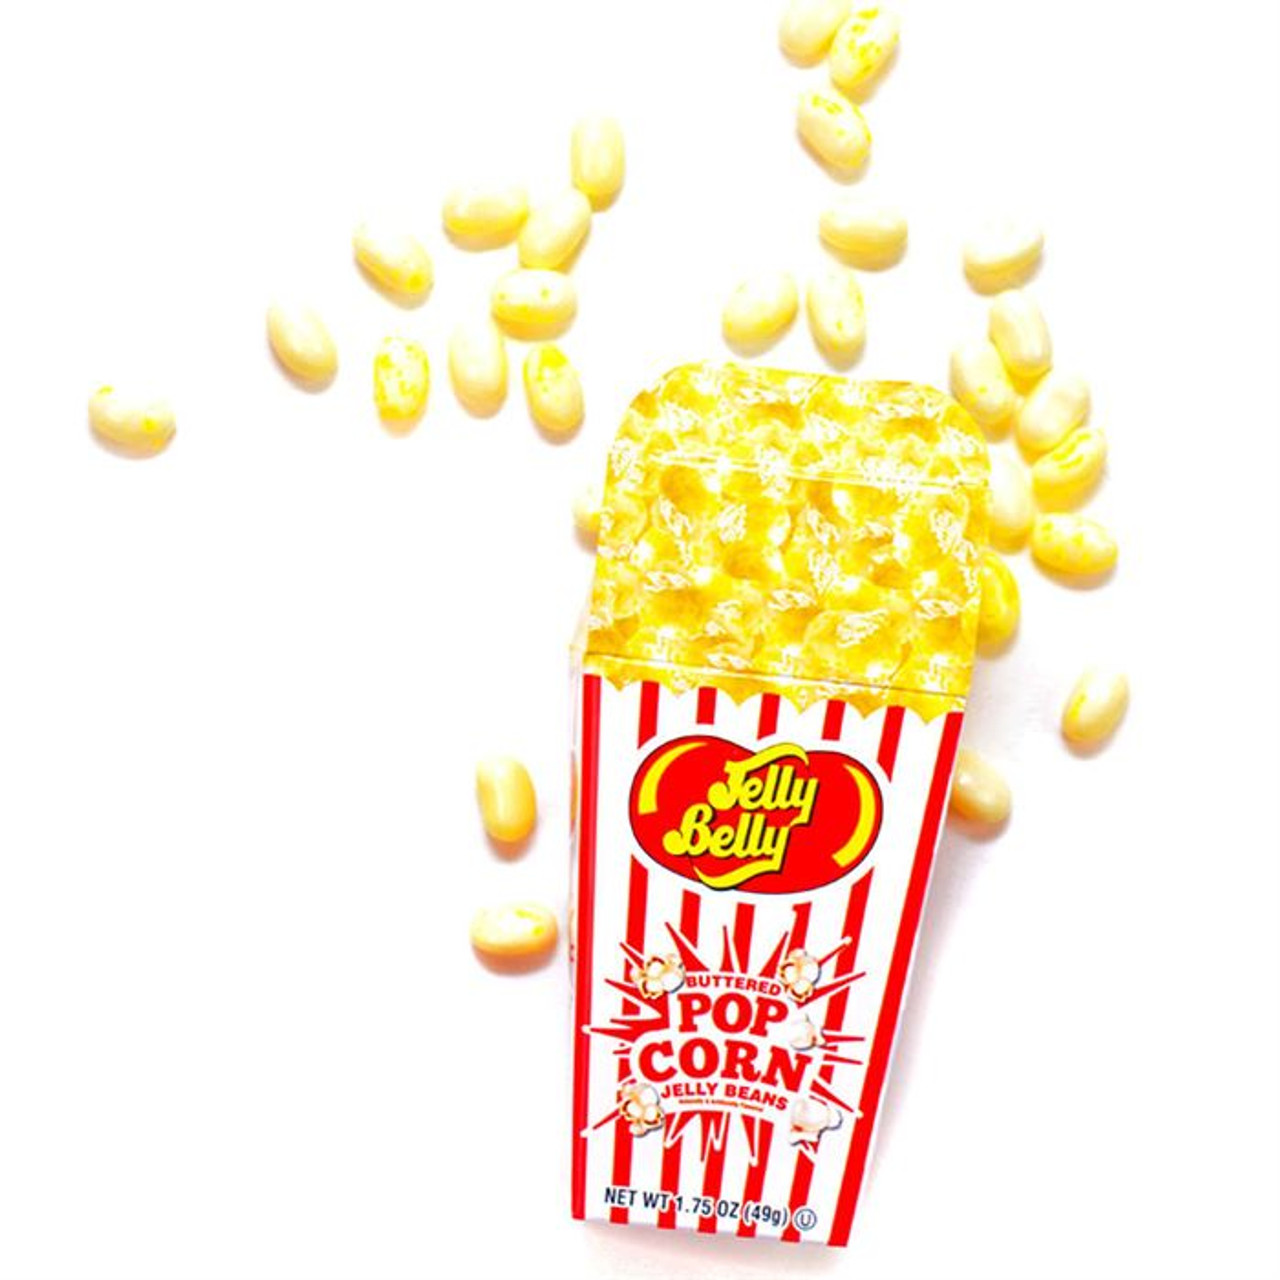 https://cdn11.bigcommerce.com/s-oxoxmgwste/images/stencil/1280x1280/products/442/8281/jelly-belly-buttered-popcorn-jelly-beans-box-1.75-oz__72690.1702587439.jpg?c=1